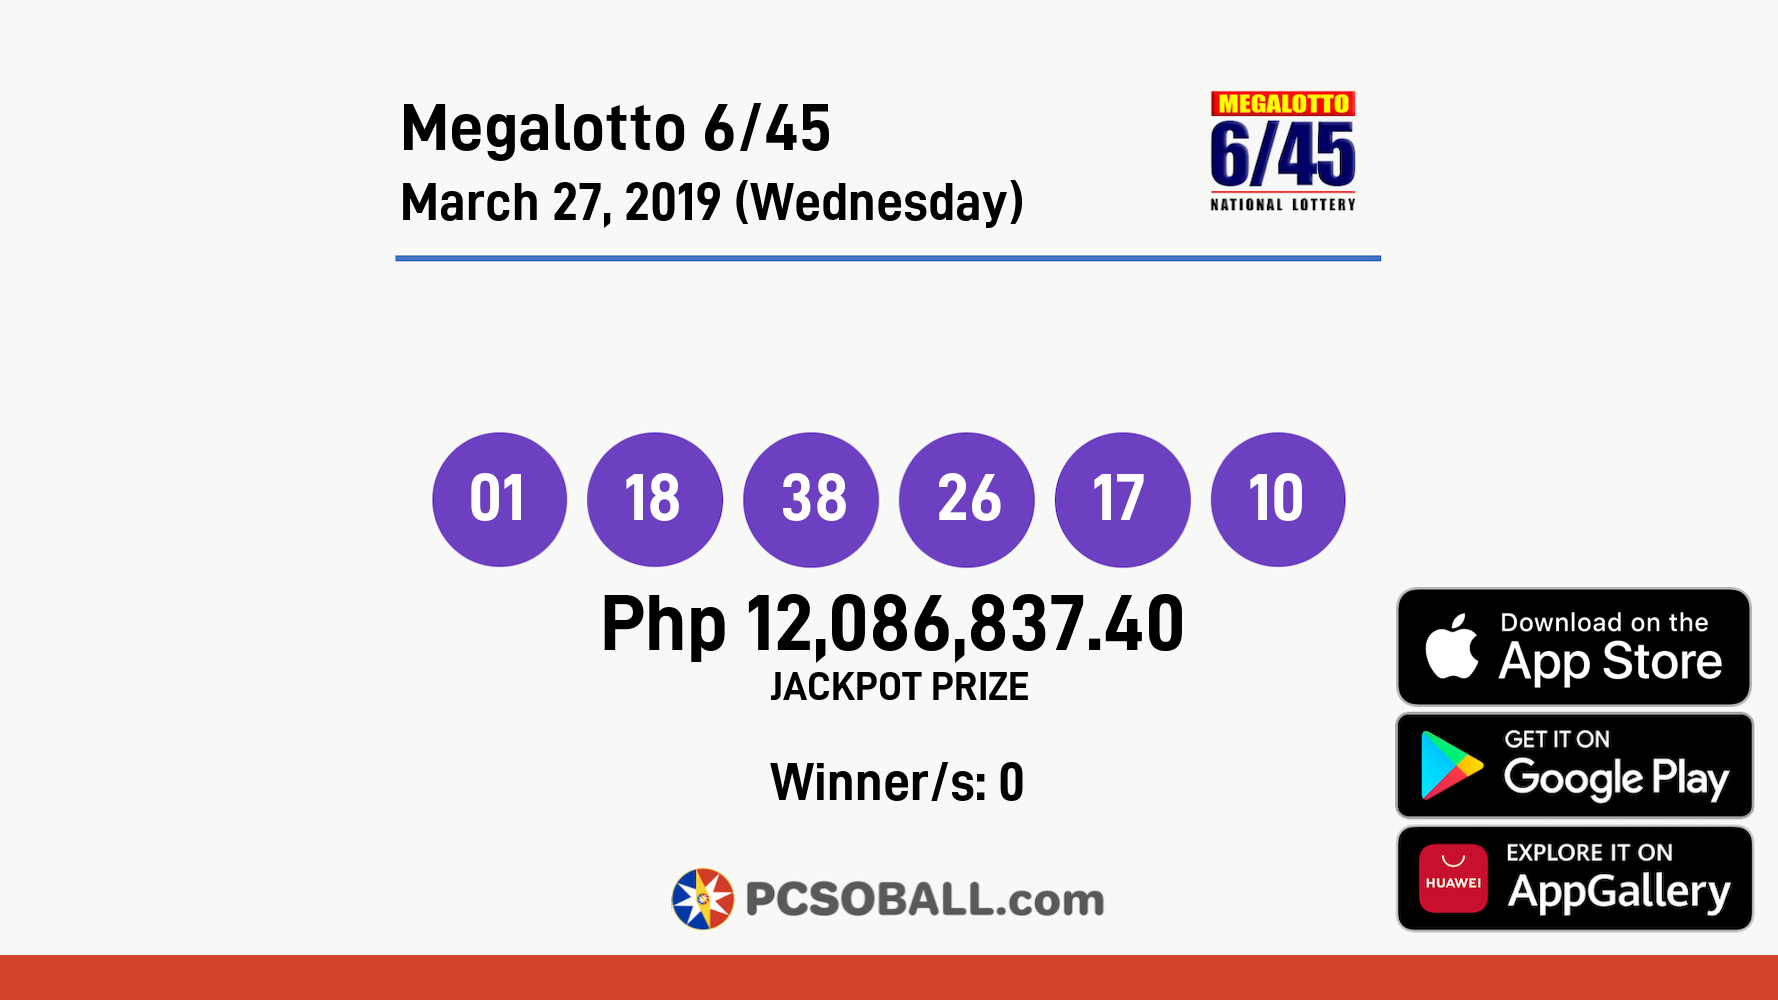 Megalotto 6/45 March 27, 2019 (Wednesday) Result